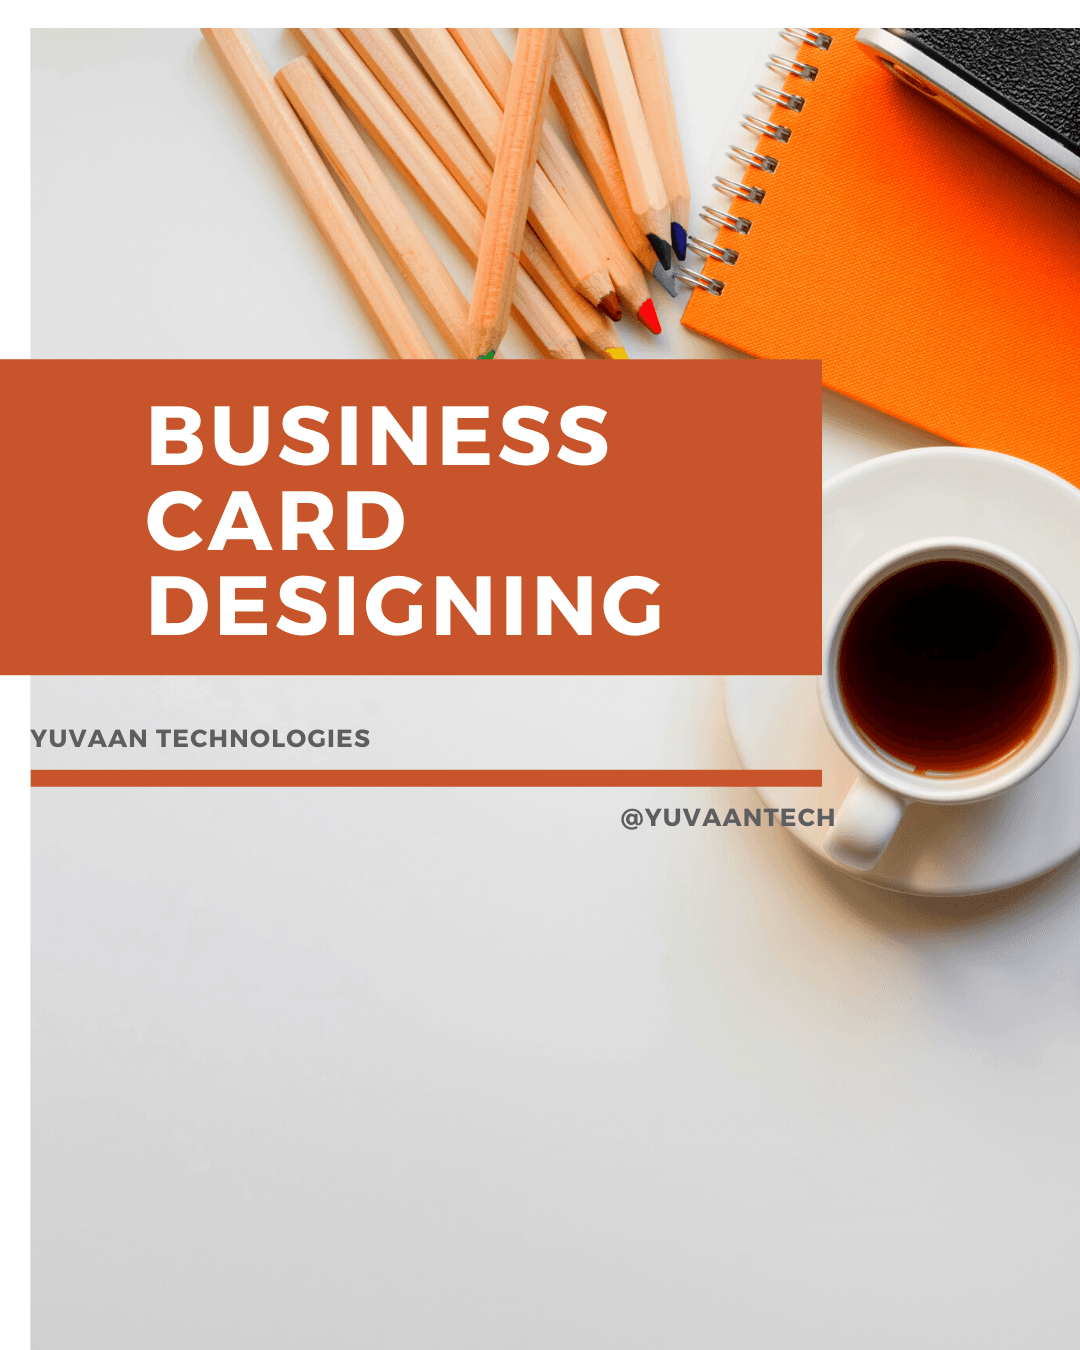 Product Business Card Designing | Yuvaan Technologies image